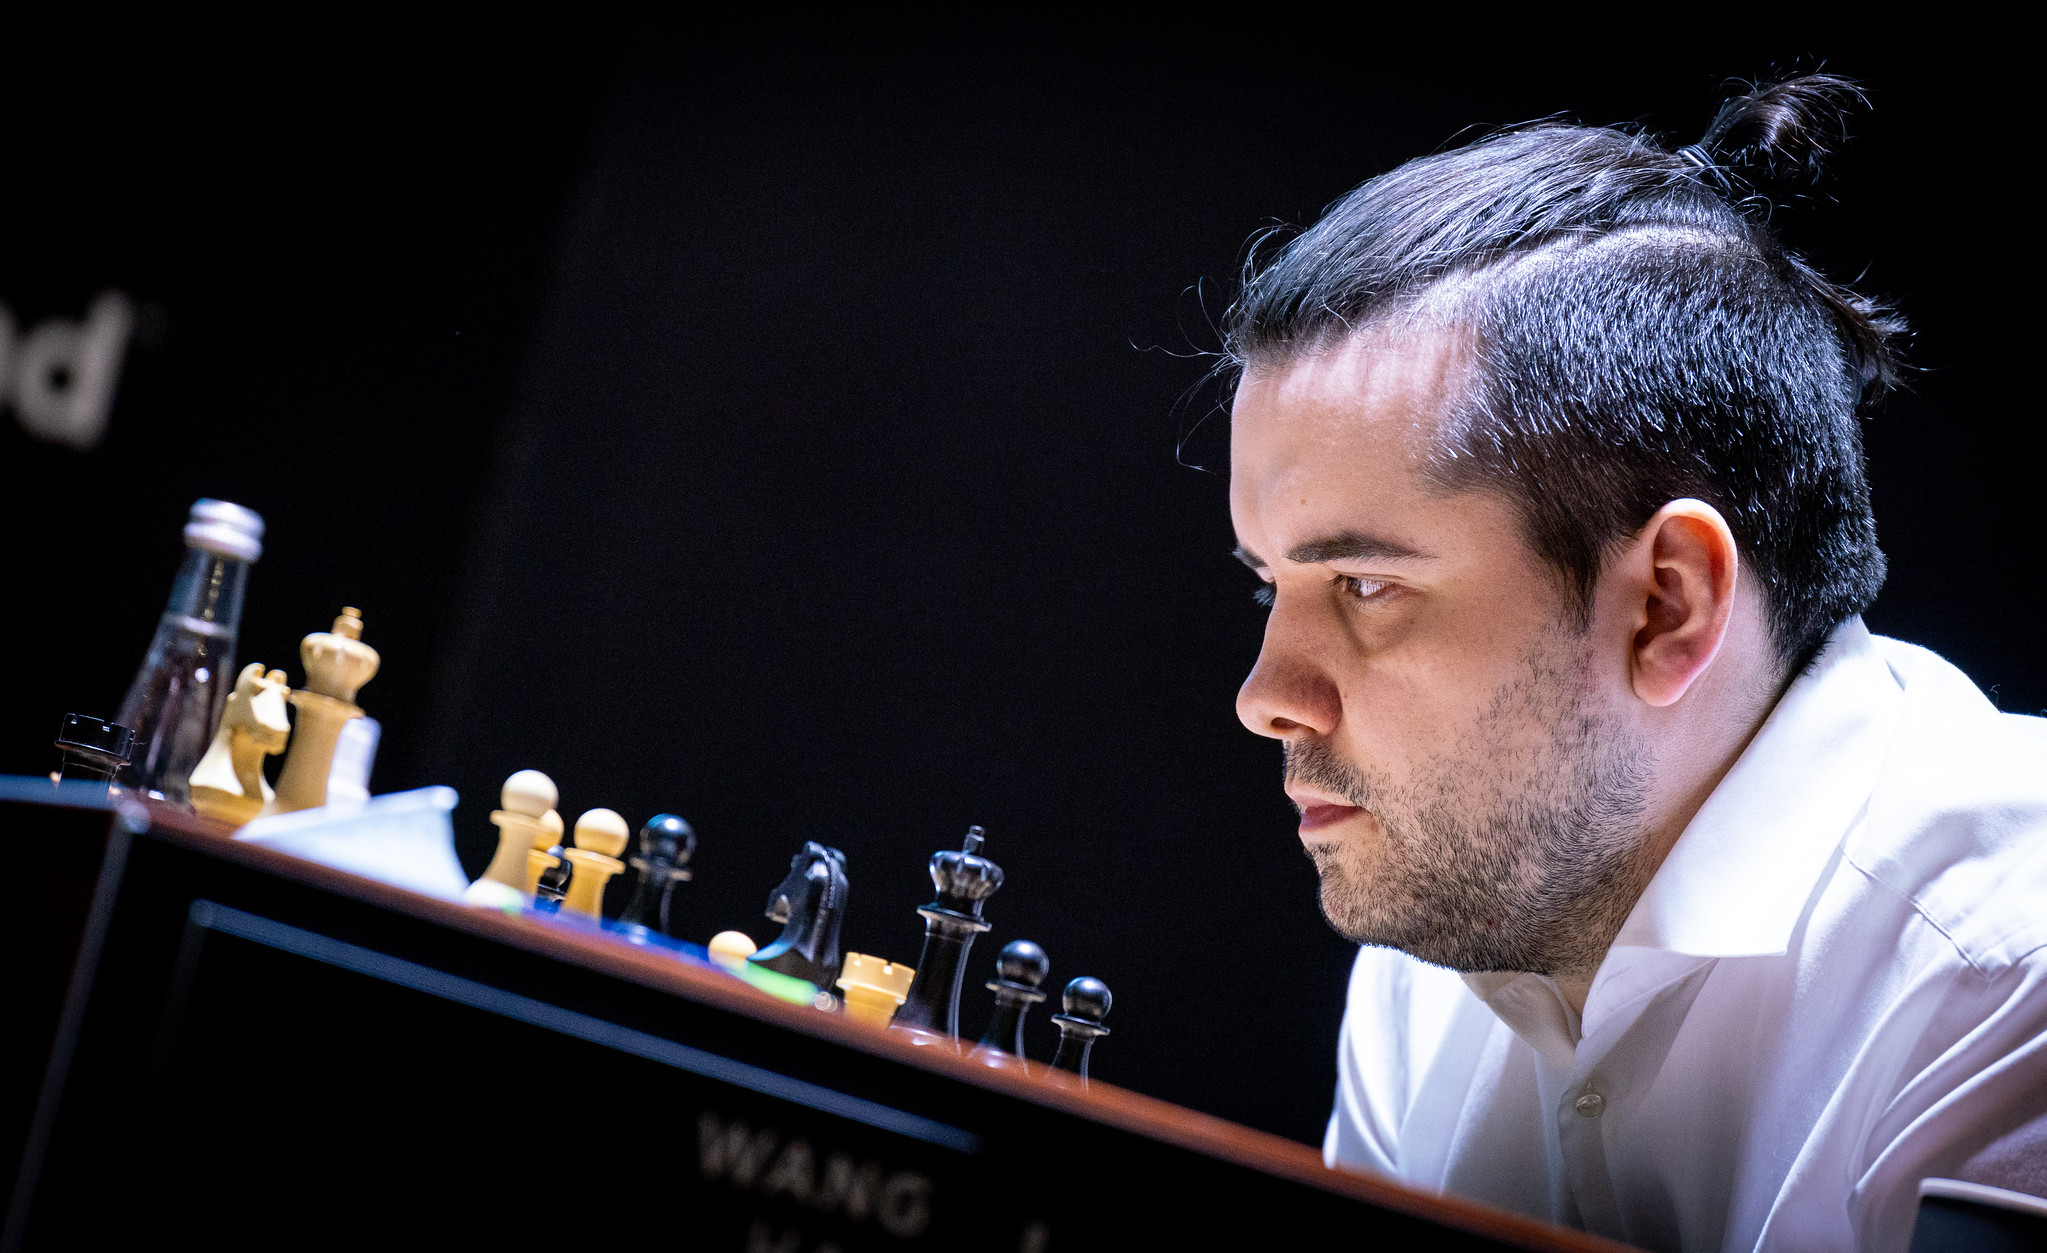 Nepomniachtchi, Wang Seize Early Lead At FIDE Candidates